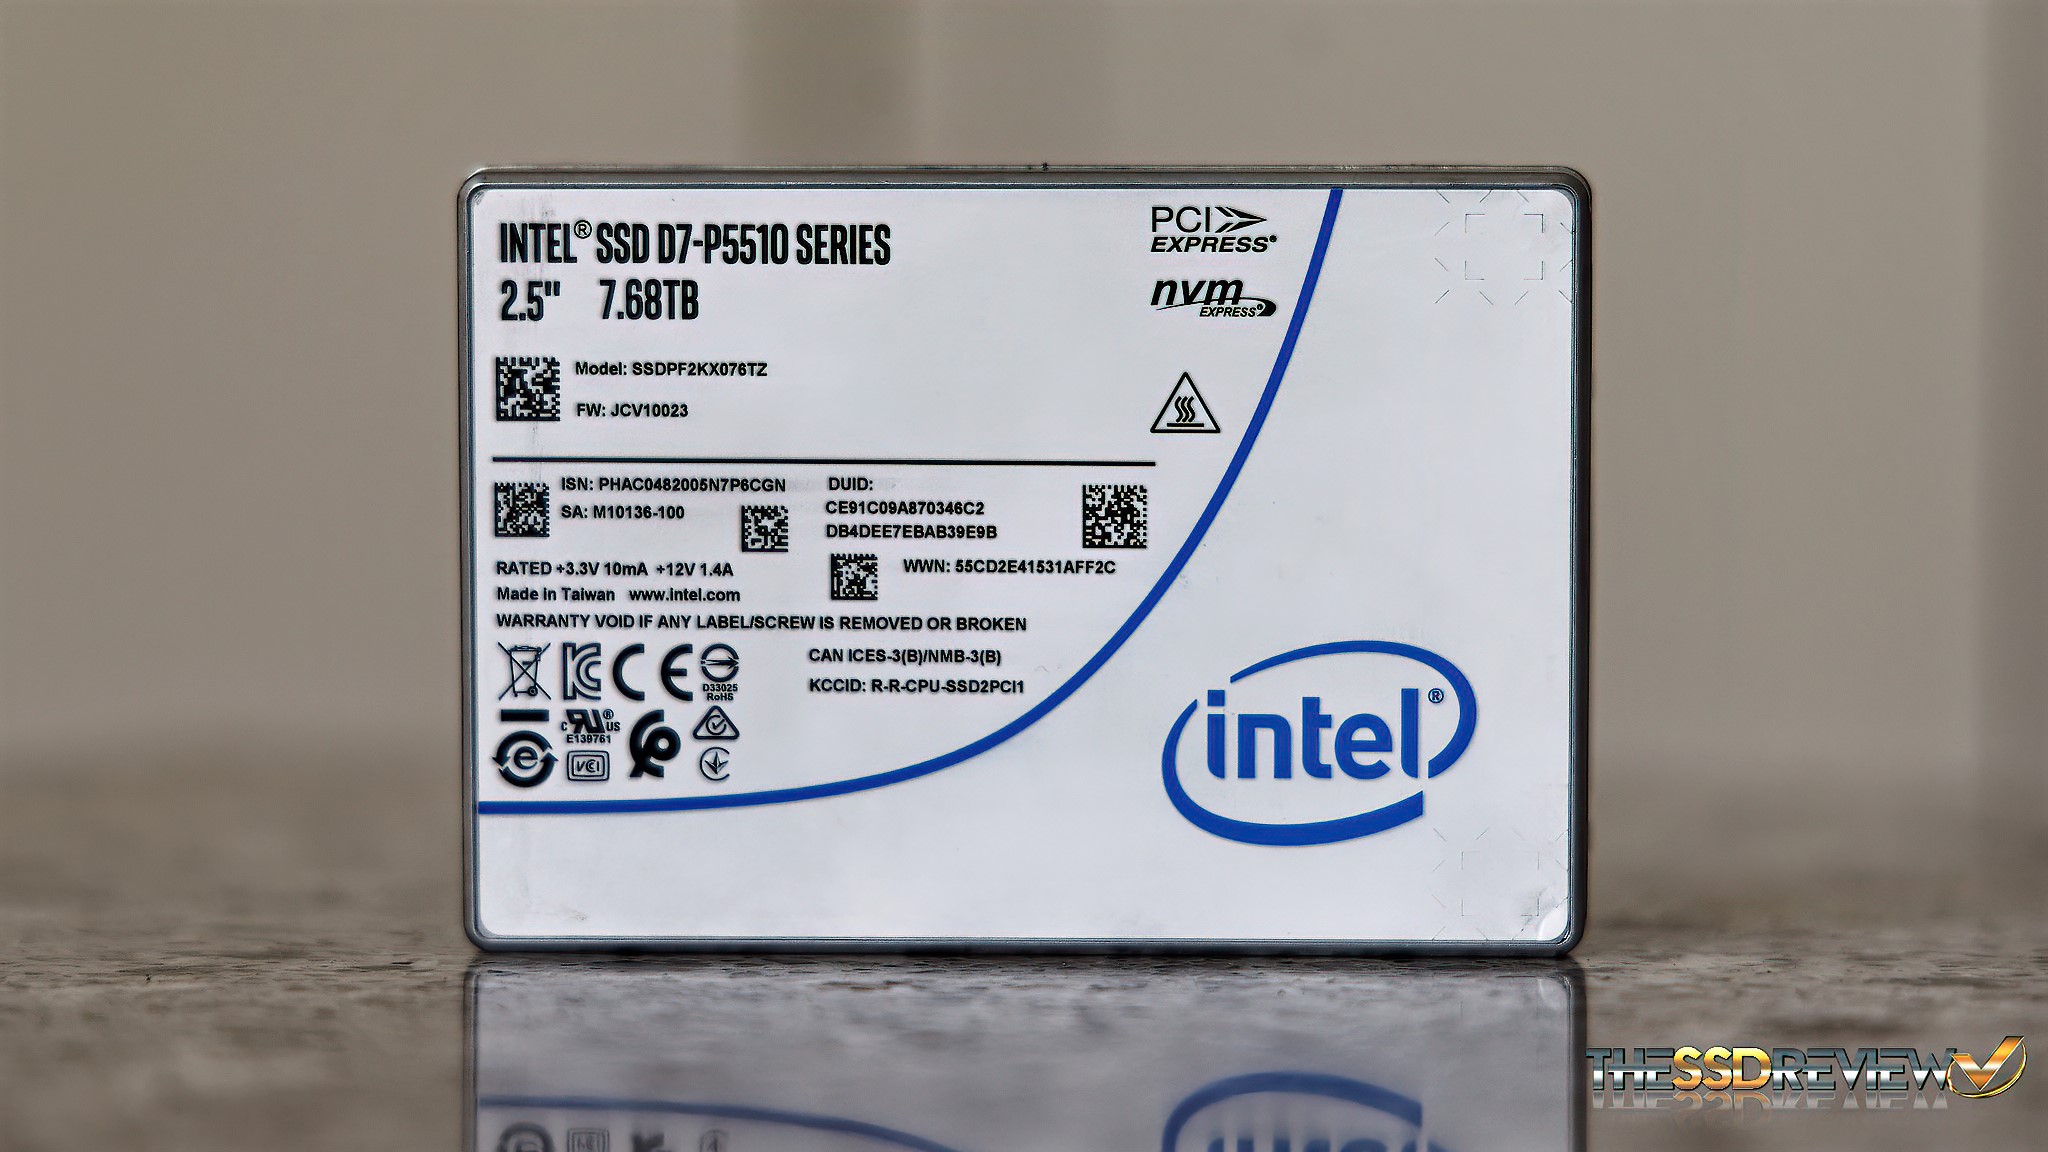 D7-P5510 8TB PCIe 4 NVMe Data Center SSD Look - Intel Offers Promising Gen 4 Business Storage Solutions | The SSD Review